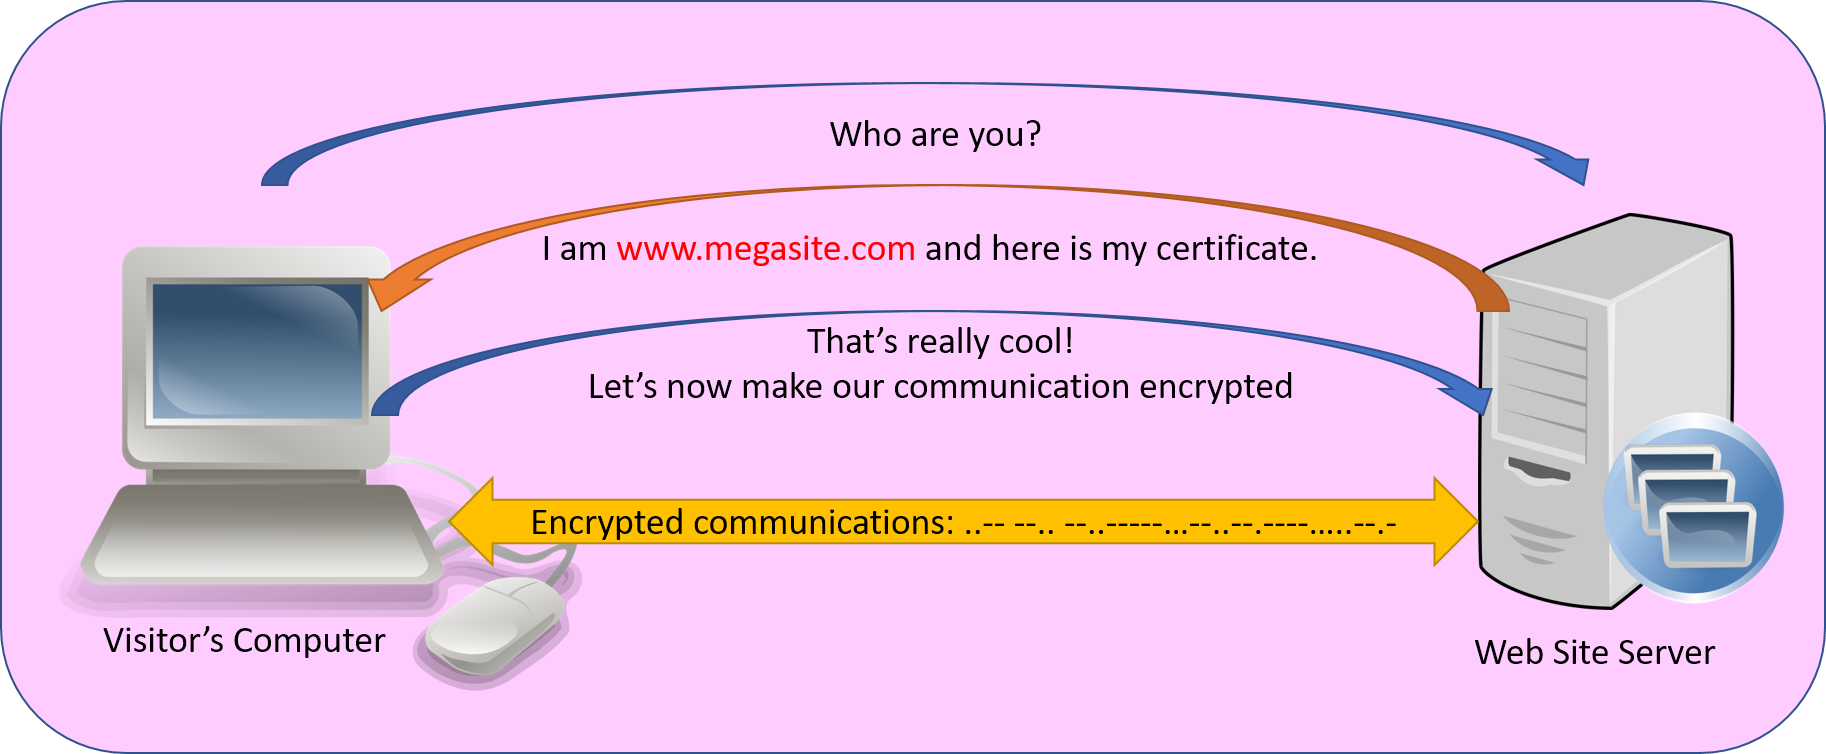 Web Site Security Certificates – SSL – What is it and why do I need it?